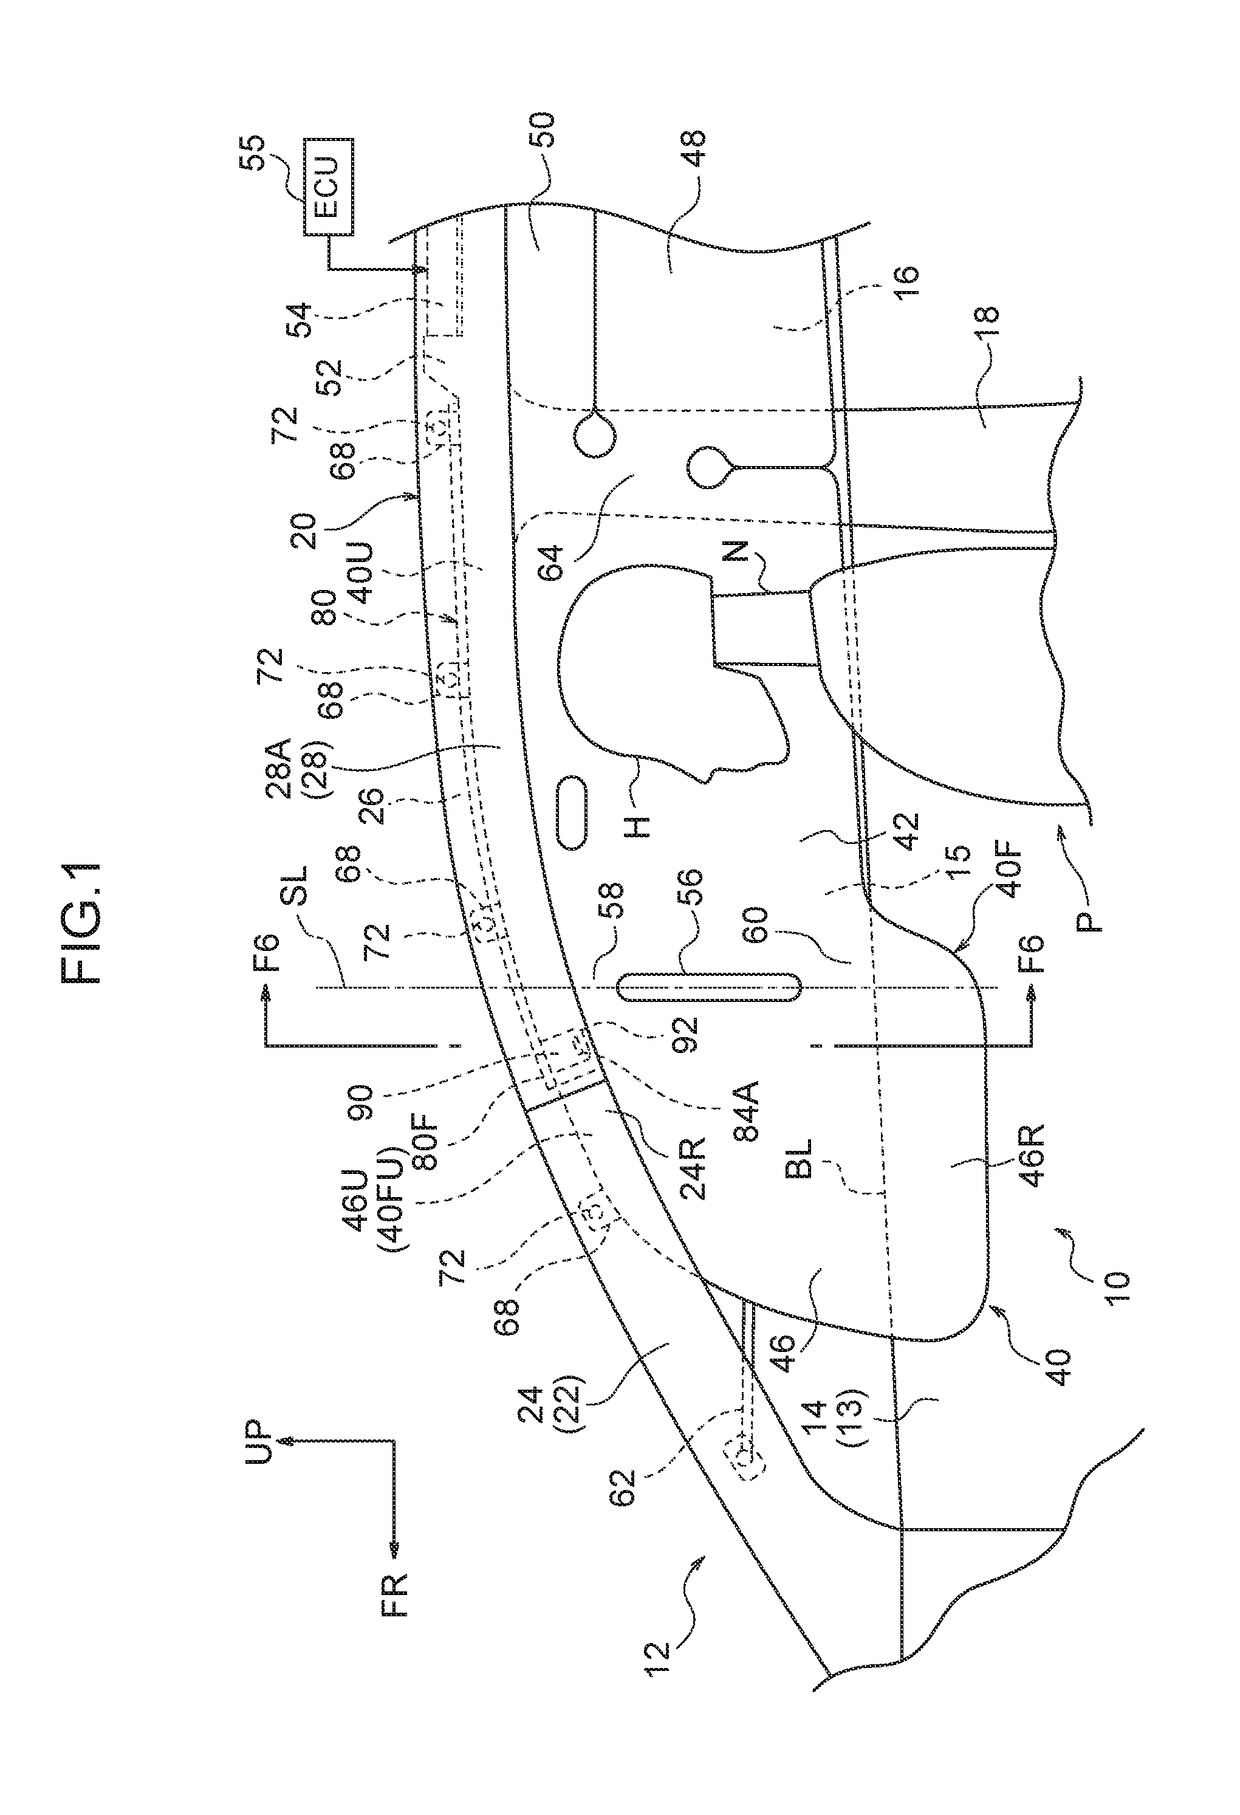 Curtain airbag device for vehicle